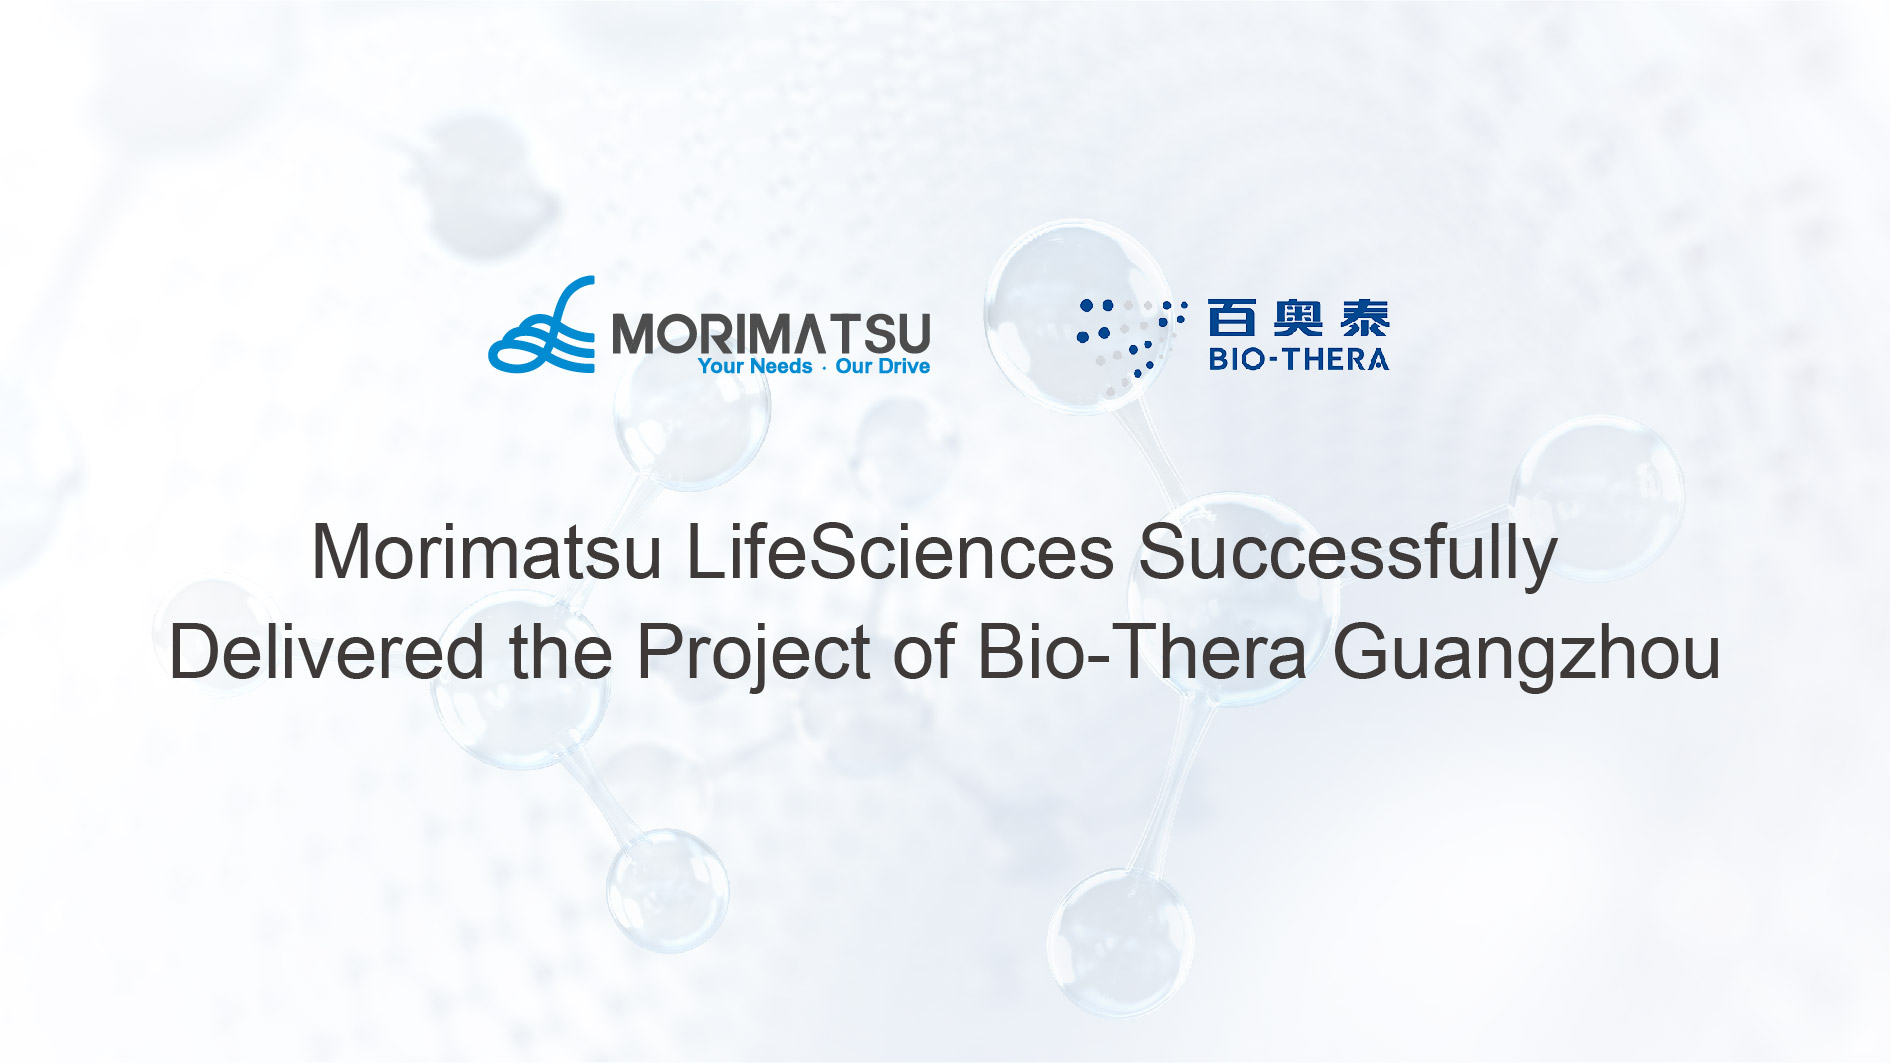 Morimatsu LifeSciences Successfully Delivered the Project of Bio-Thera Guangzhou, Further Empowering Bio-pharmaceutical Enterprises